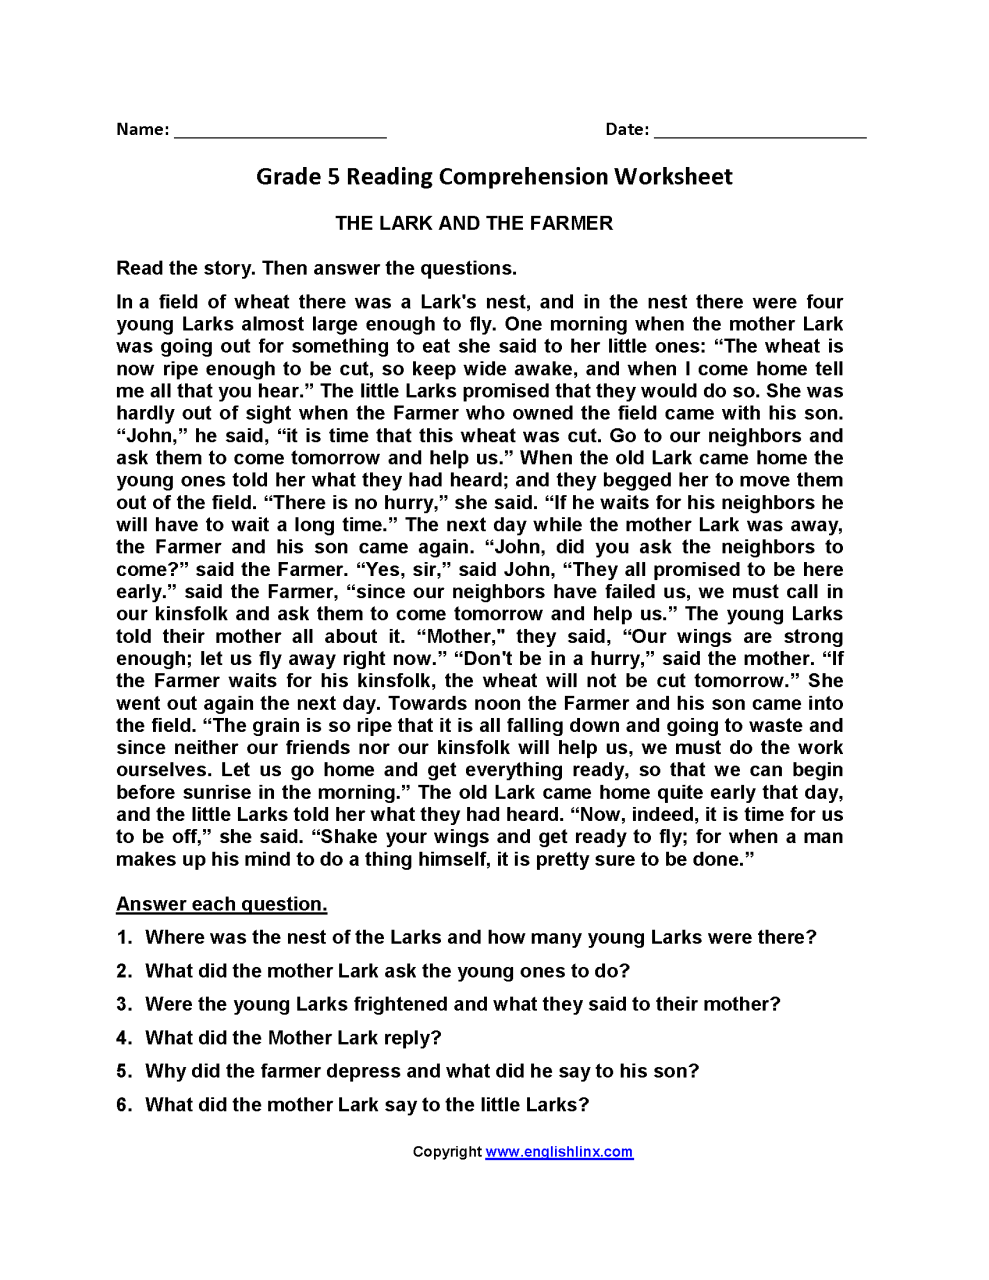 Live Worksheet For Class 5 English Class Discussion